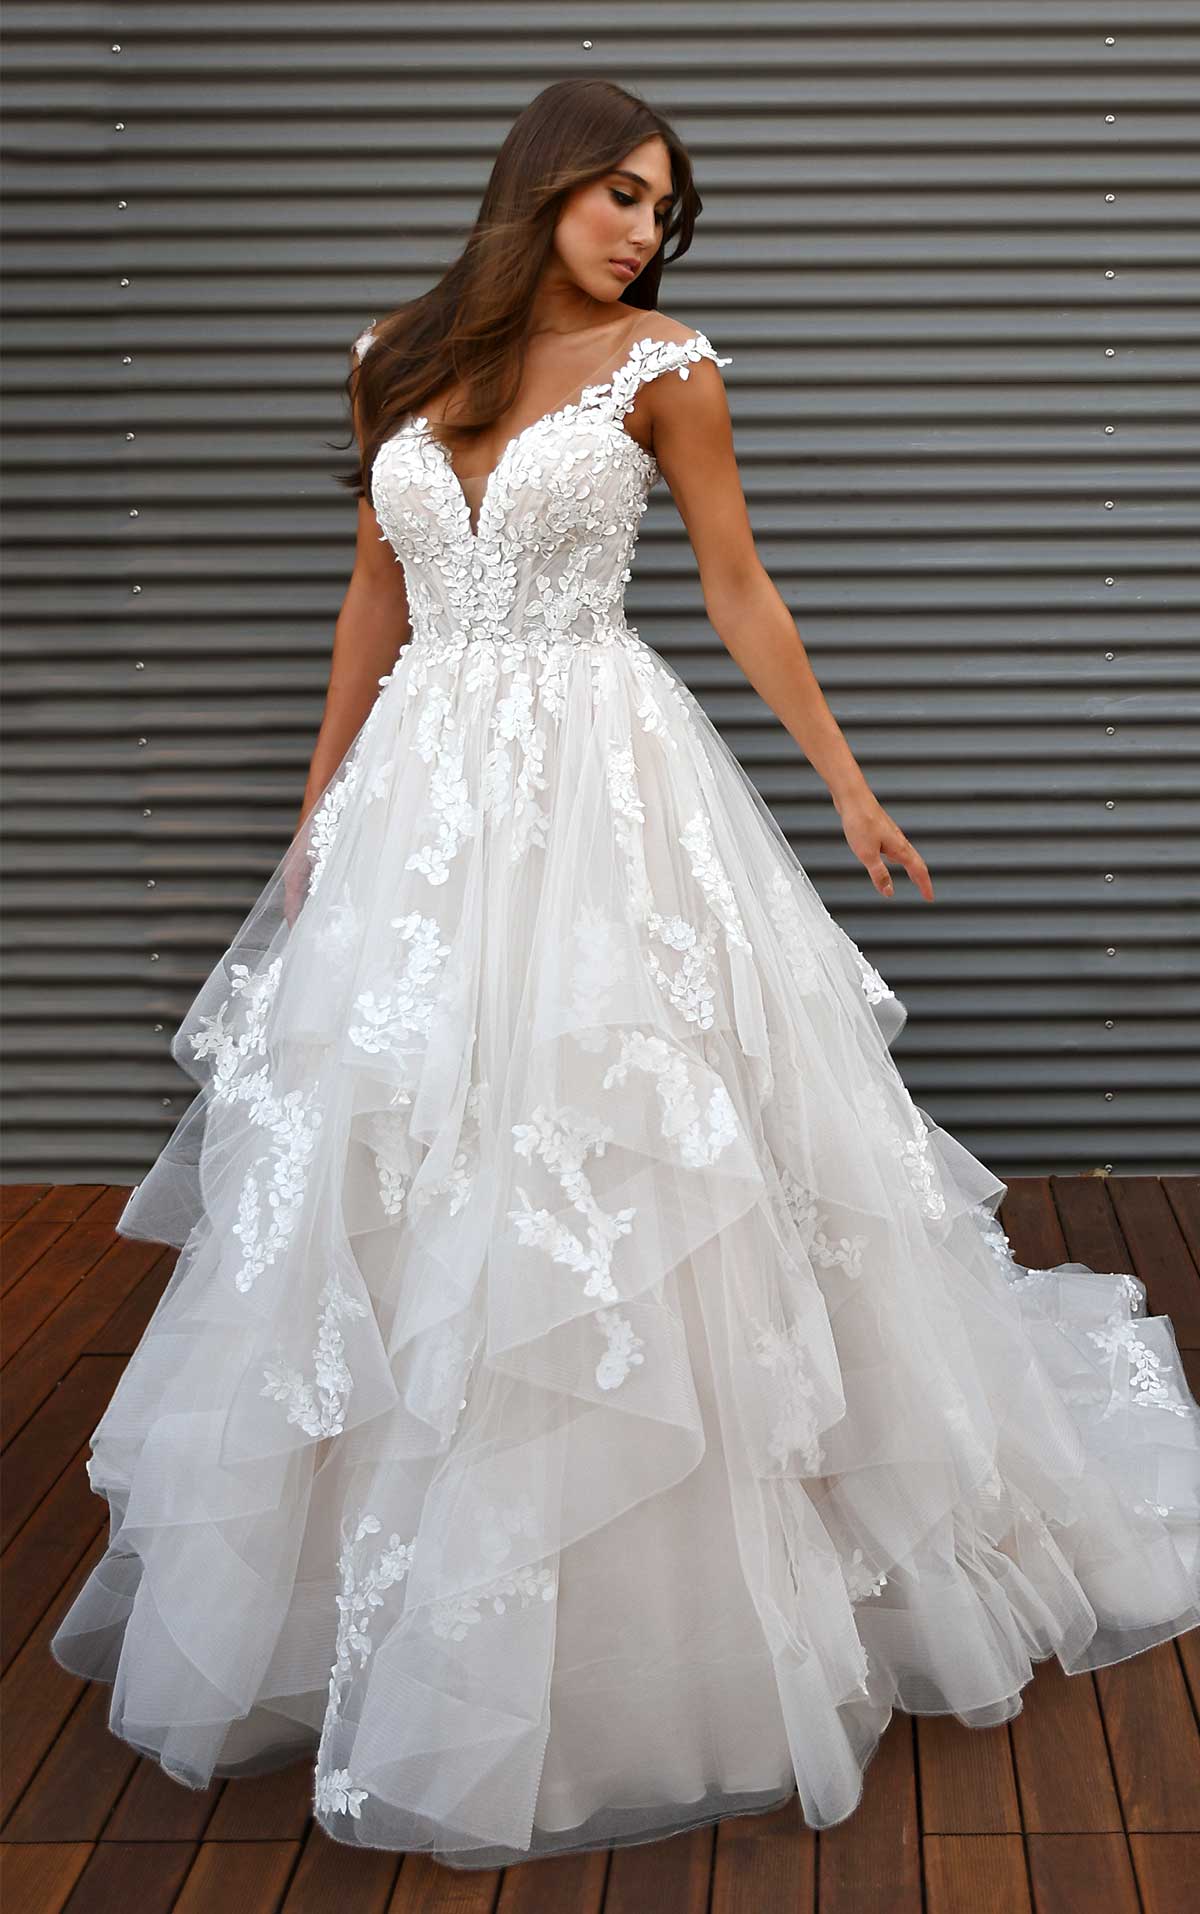 Gorgeous short sleeves illusion sweetheart white sparkle lace ball gown  wedding dress - various styles